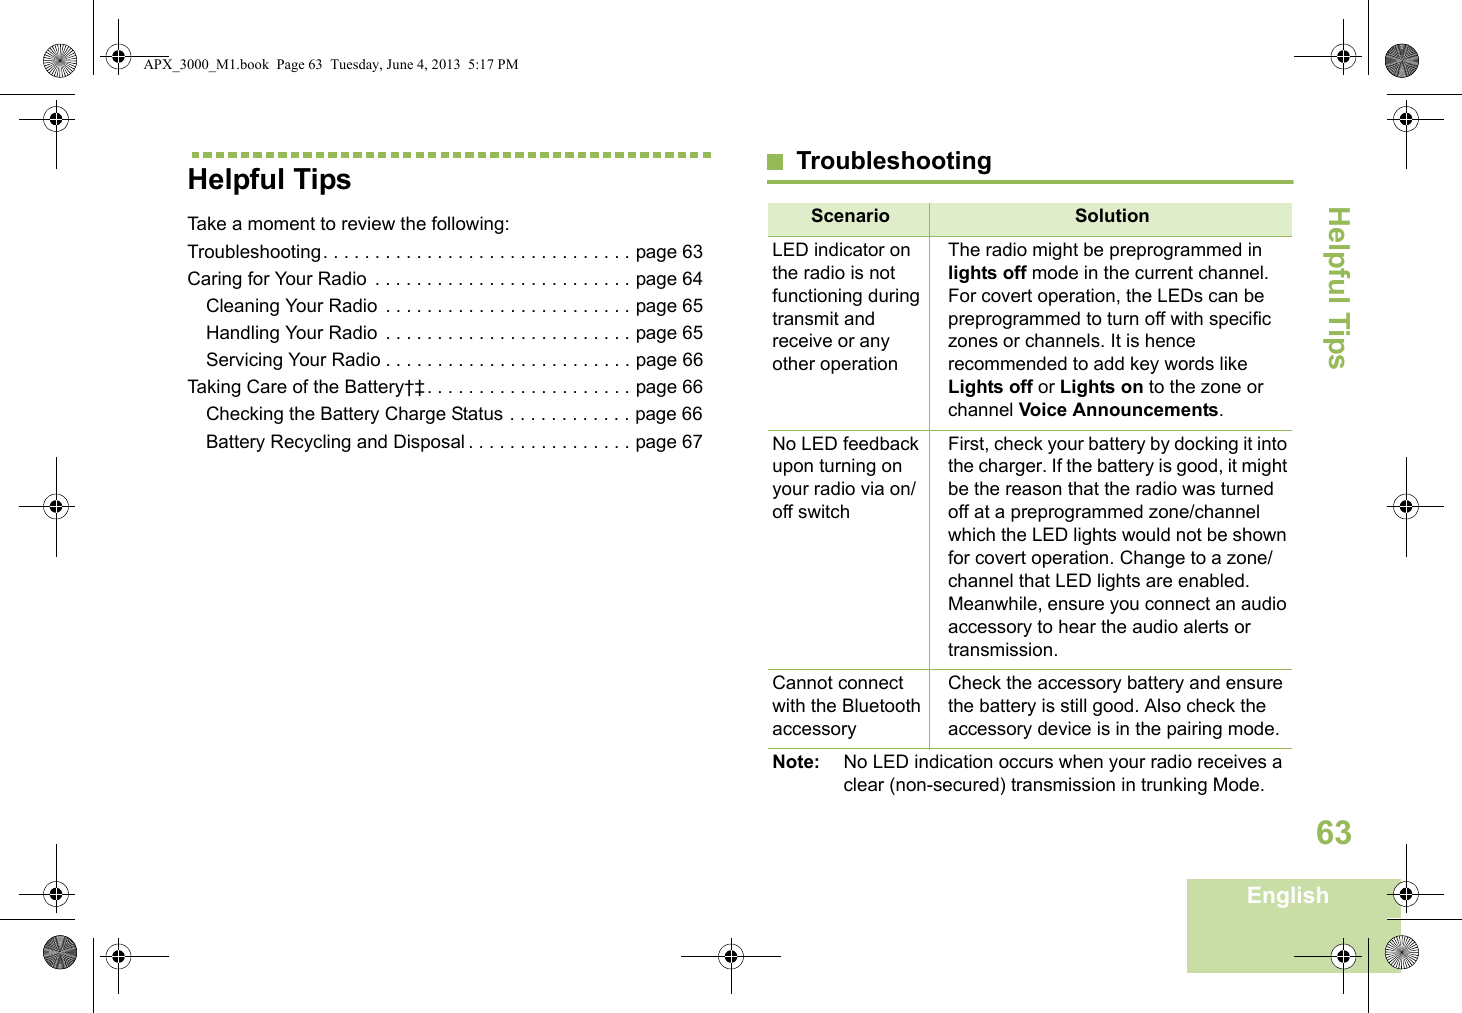 Helpful TipsEnglish63Helpful TipsTake a moment to review the following:Troubleshooting. . . . . . . . . . . . . . . . . . . . . . . . . . . . . . page 63Caring for Your Radio  . . . . . . . . . . . . . . . . . . . . . . . . . page 64Cleaning Your Radio  . . . . . . . . . . . . . . . . . . . . . . . . page 65Handling Your Radio  . . . . . . . . . . . . . . . . . . . . . . . . page 65Servicing Your Radio . . . . . . . . . . . . . . . . . . . . . . . . page 66Taking Care of the Battery†‡. . . . . . . . . . . . . . . . . . . . page 66Checking the Battery Charge Status . . . . . . . . . . . . page 66Battery Recycling and Disposal . . . . . . . . . . . . . . . . page 67TroubleshootingScenario SolutionLED indicator on the radio is not functioning during transmit and receive or any other operationThe radio might be preprogrammed in lights off mode in the current channel. For covert operation, the LEDs can be preprogrammed to turn off with specific zones or channels. It is hence recommended to add key words like Lights off or Lights on to the zone or channel Voice Announcements.No LED feedback upon turning on your radio via on/off switchFirst, check your battery by docking it into the charger. If the battery is good, it might be the reason that the radio was turned off at a preprogrammed zone/channel which the LED lights would not be shown for covert operation. Change to a zone/channel that LED lights are enabled. Meanwhile, ensure you connect an audio accessory to hear the audio alerts or transmission.Cannot connect with the Bluetooth accessoryCheck the accessory battery and ensure the battery is still good. Also check the accessory device is in the pairing mode.Note: No LED indication occurs when your radio receives a clear (non-secured) transmission in trunking Mode.APX_3000_M1.book  Page 63  Tuesday, June 4, 2013  5:17 PM